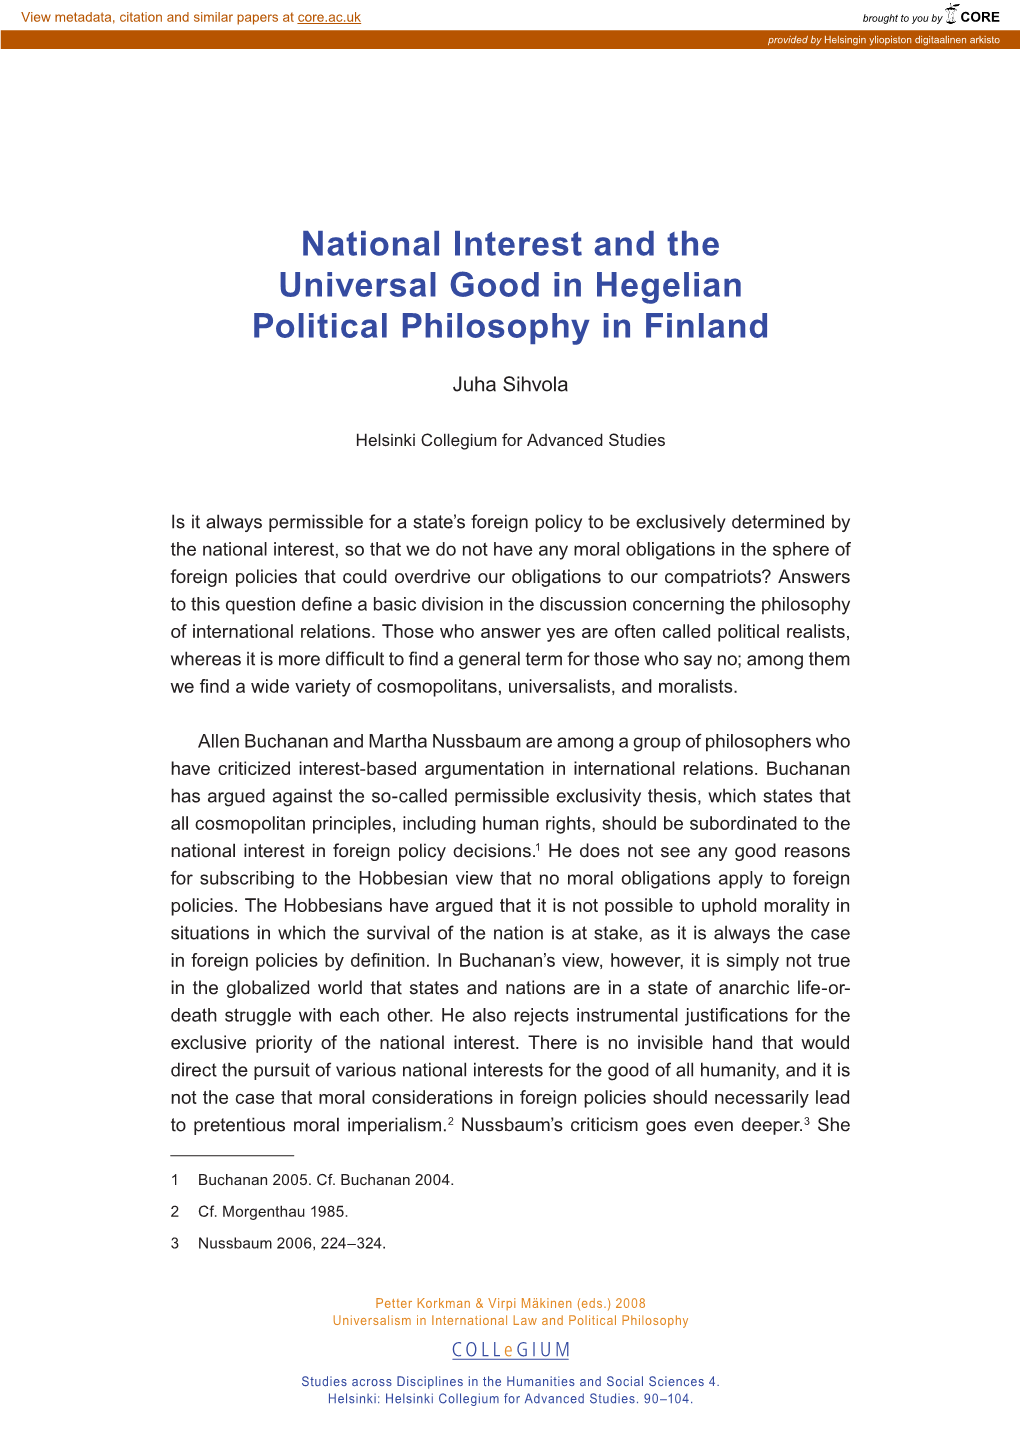 National Interest and the Universal Good in Hegelian Political Philosophy in Finland